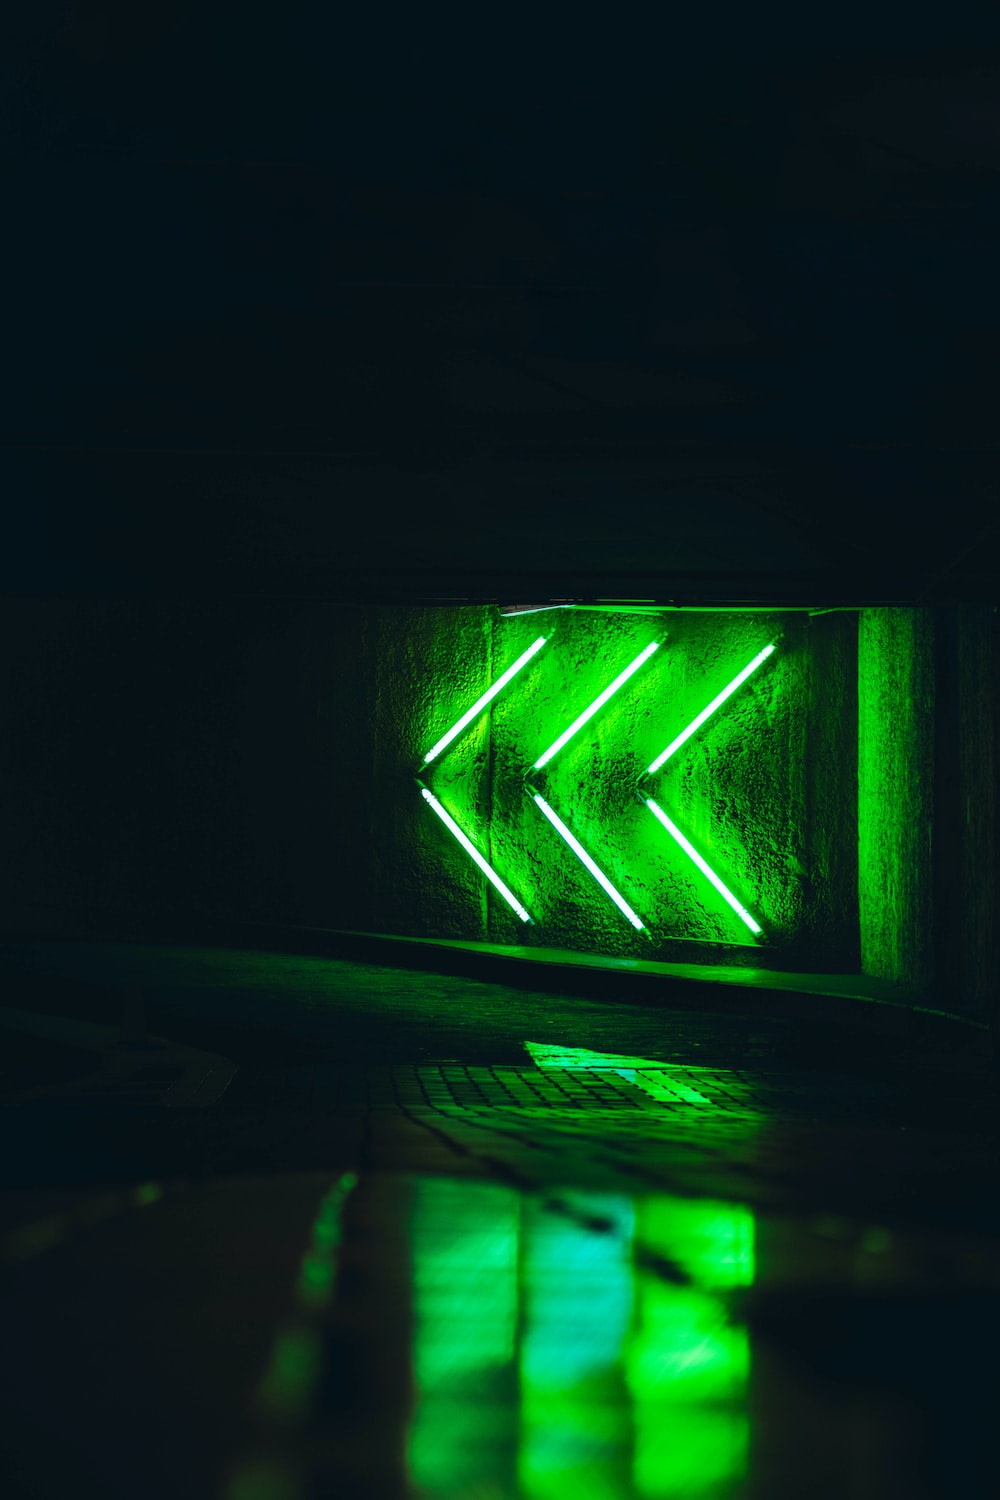 Green neon pictures hd download free images on